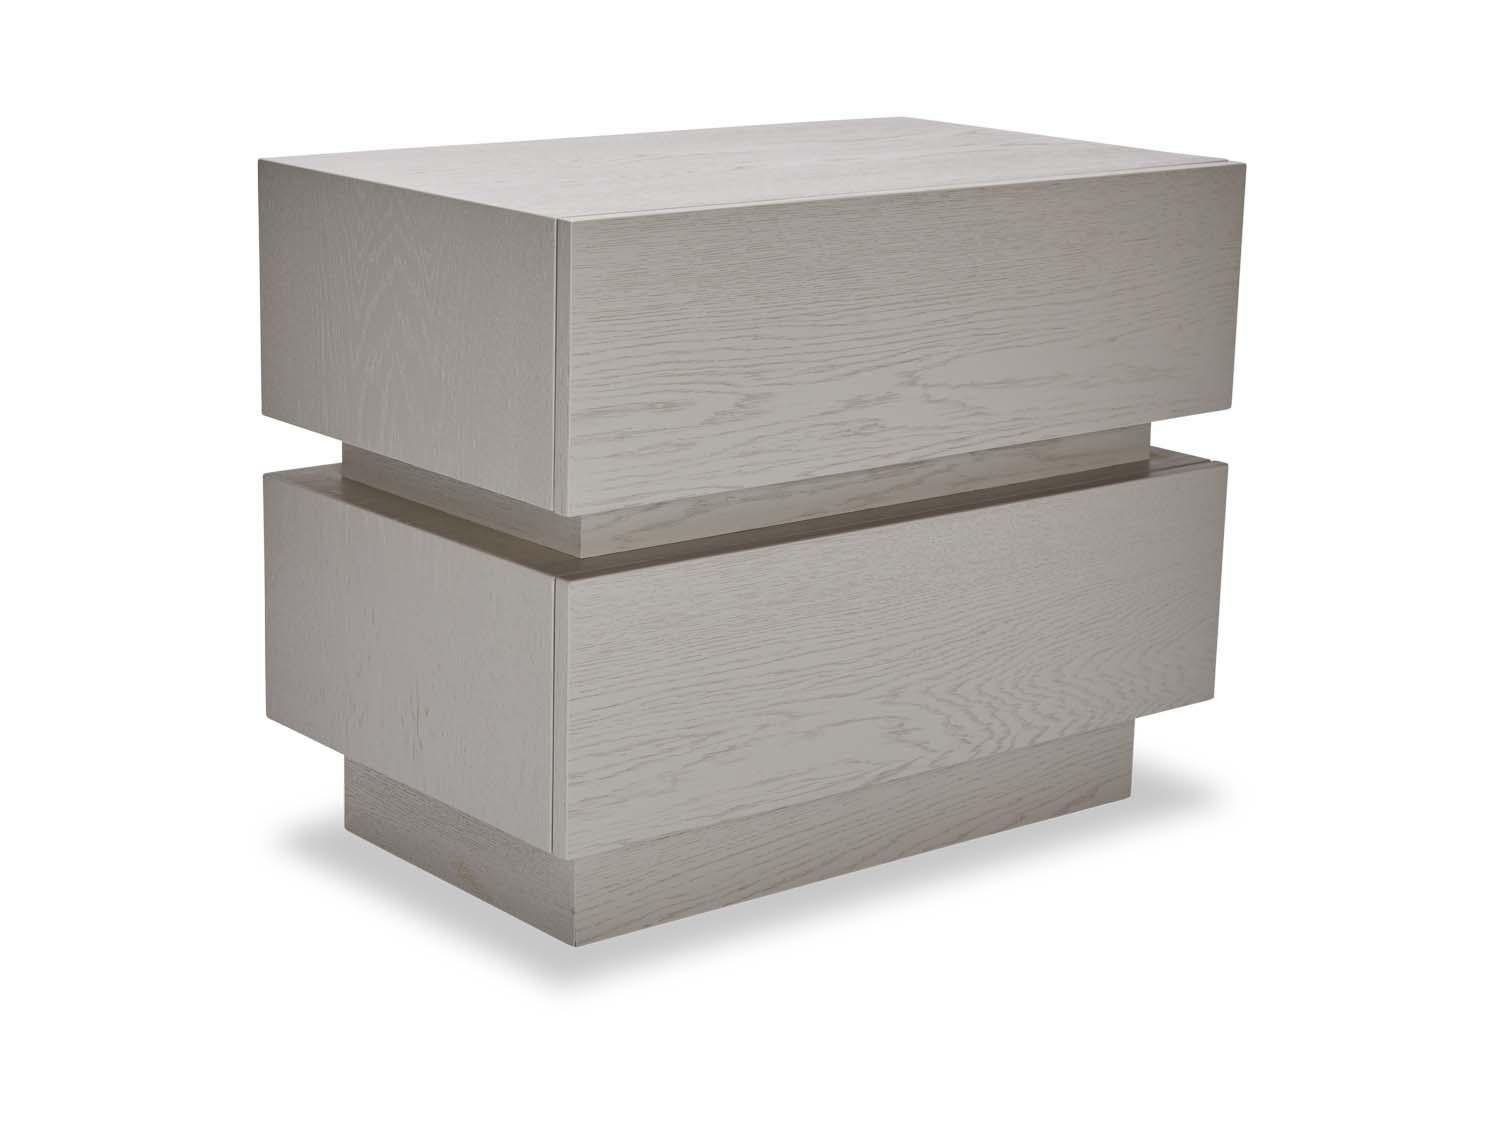 The stacked box nightstand is a bedside table with two drawers that is available in either American walnut or white oak. Available in two sizes.

The Lawson-Fenning Collection is designed and handmade in Los Angeles, California.
Message us to